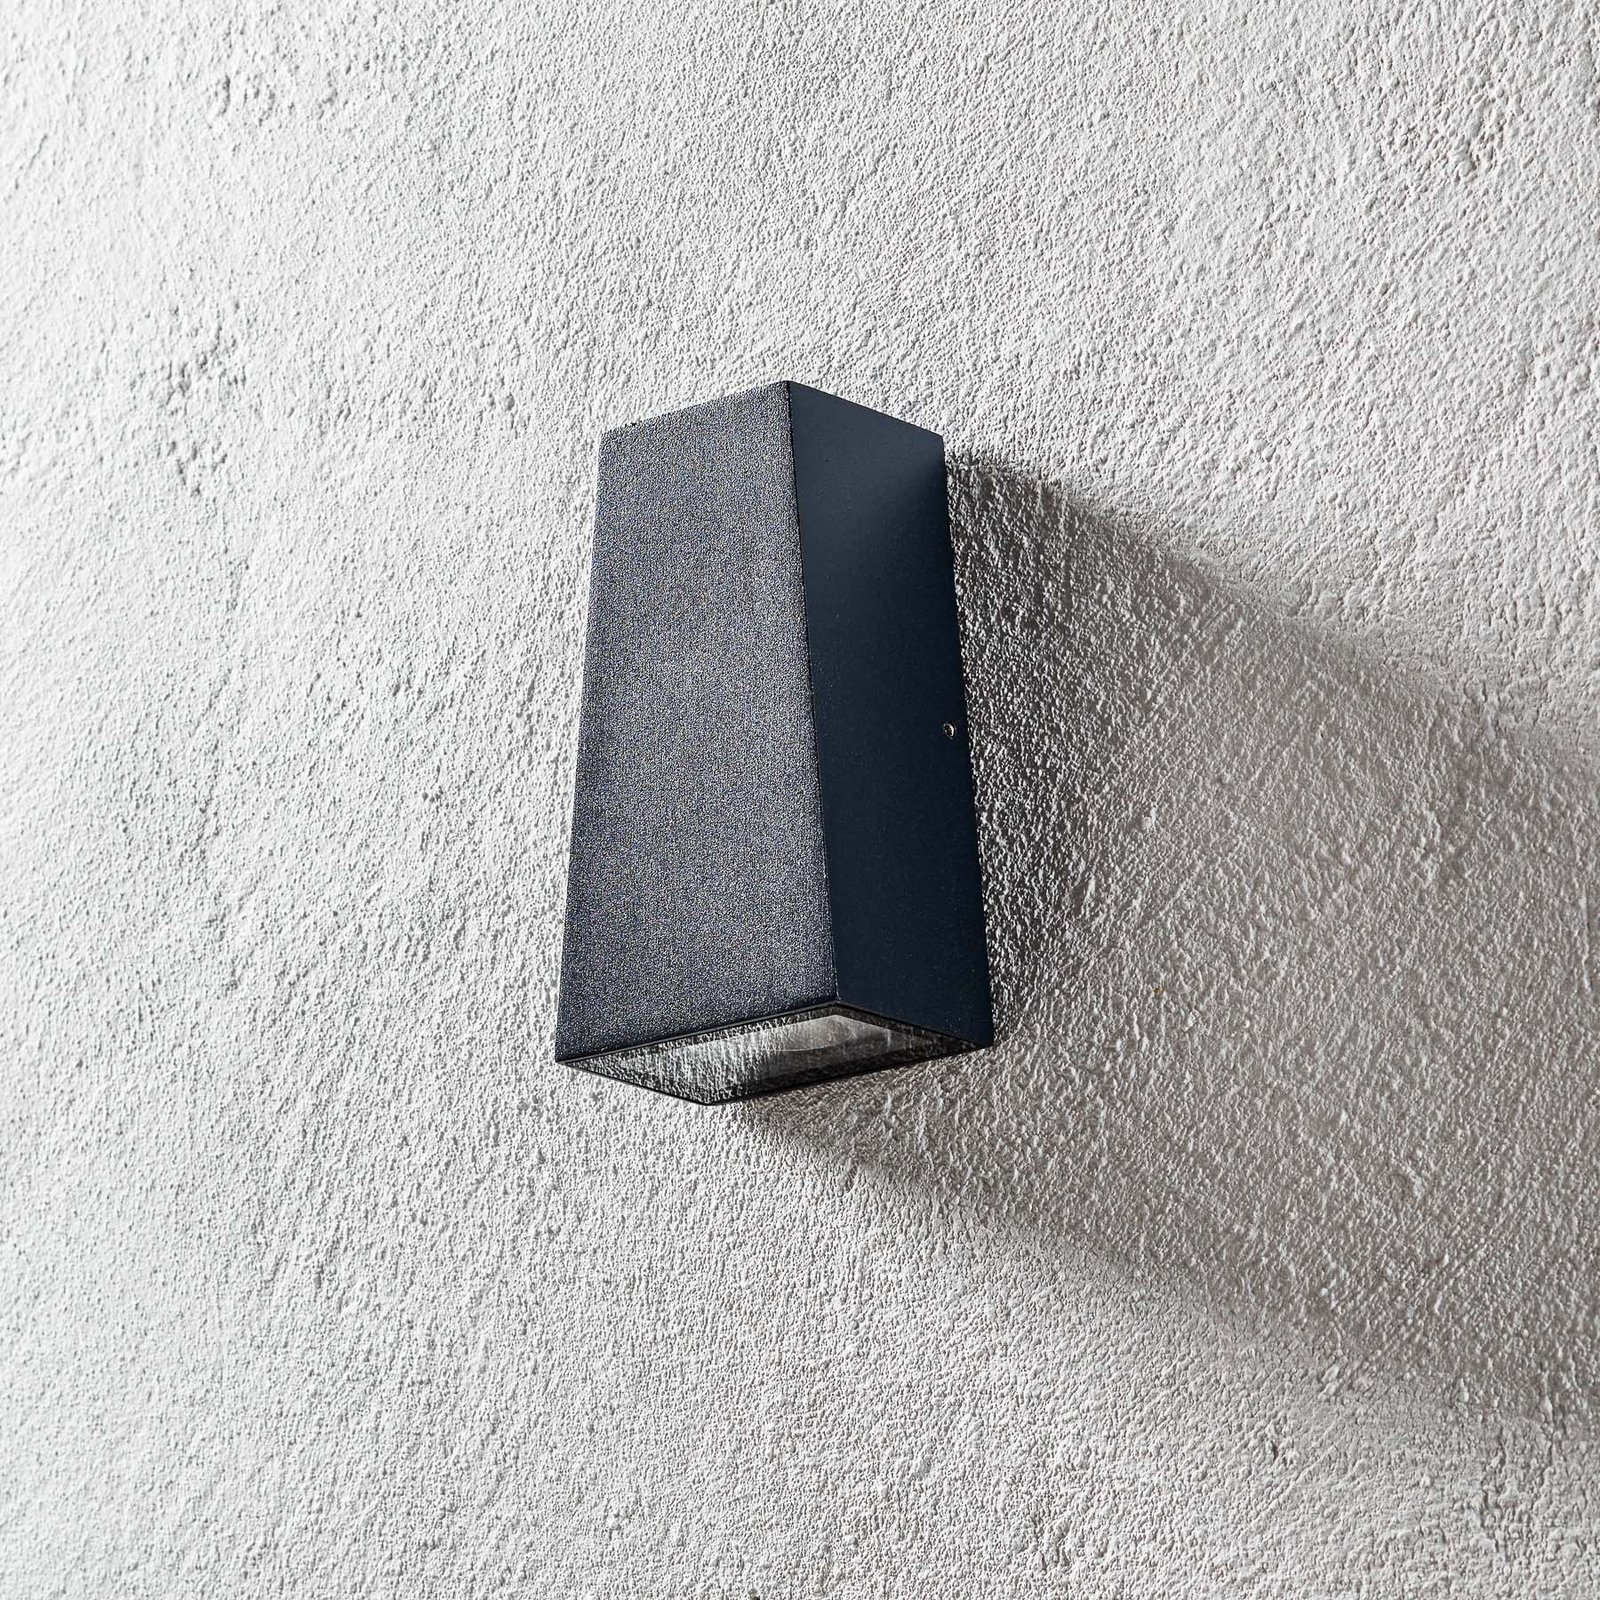 THORNeco Holly Cone Square Down LED-Wandleuchte